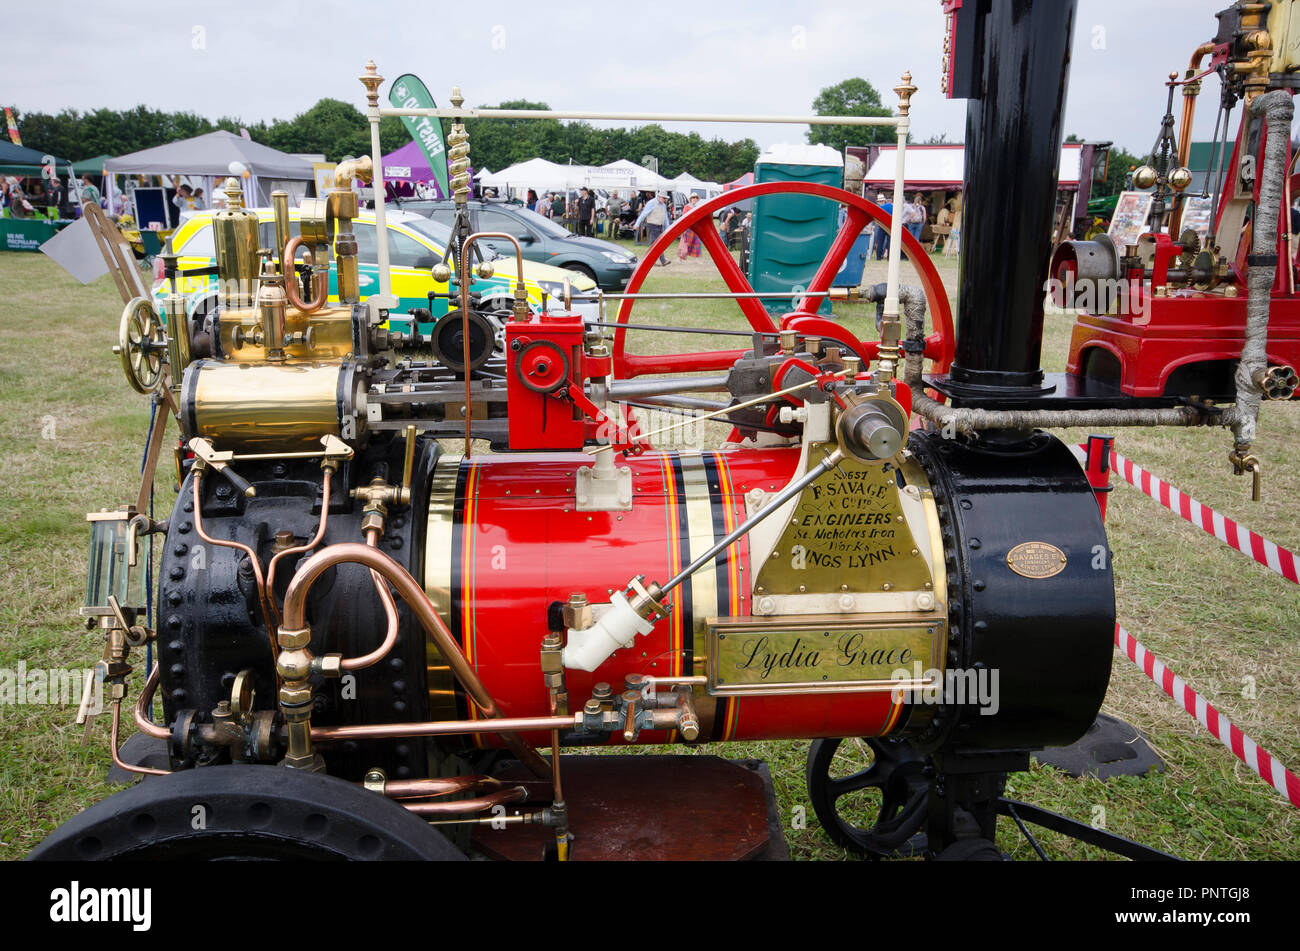 Steam Fayre Event in Hertfordshire, display of Tractors and Steam Engines held annually and open to Public viewing. Stock Photo